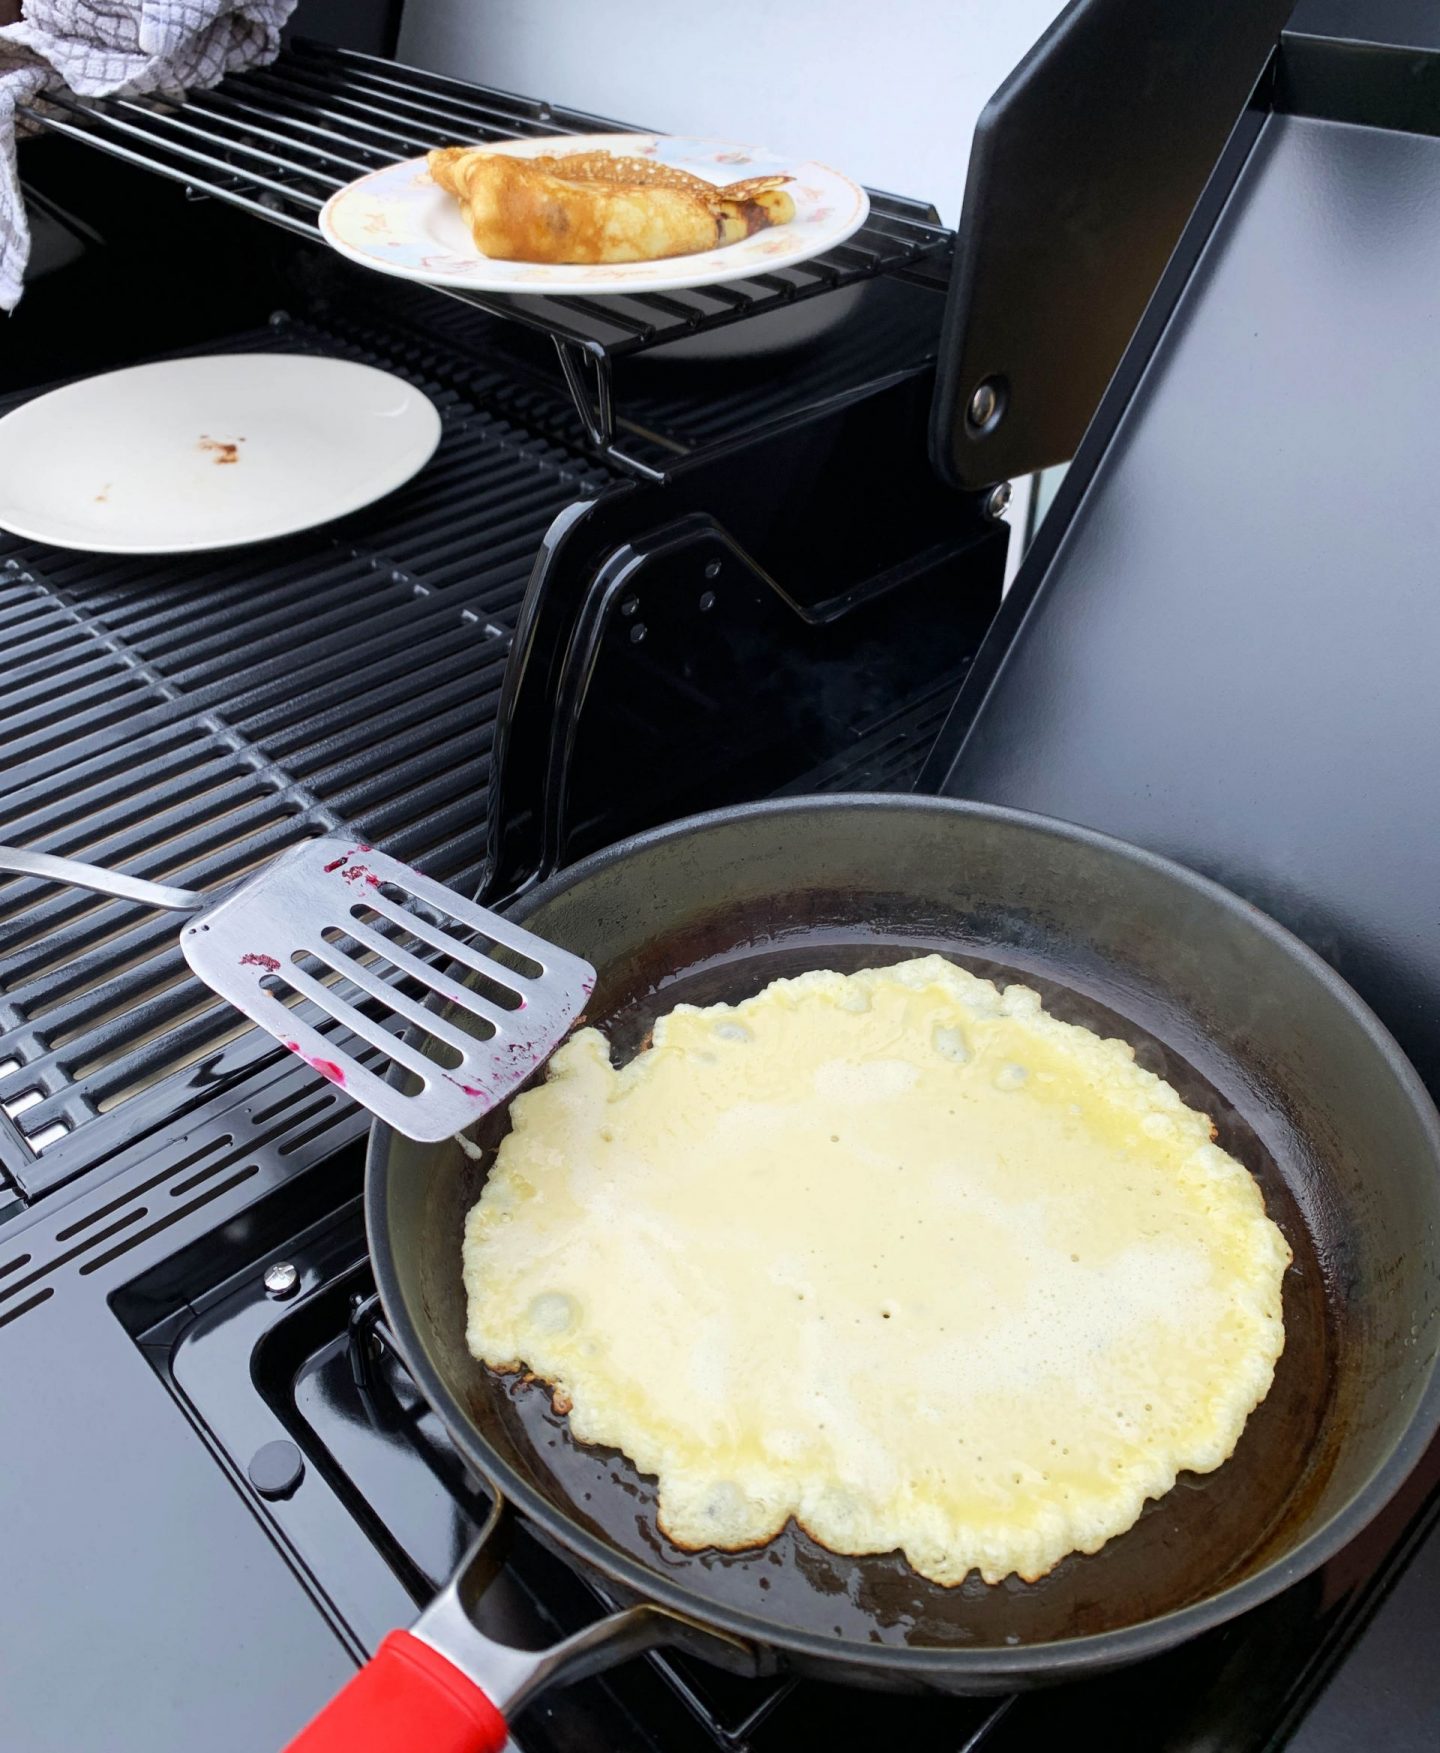 Pancakes cooked on a gas-grill barbecue